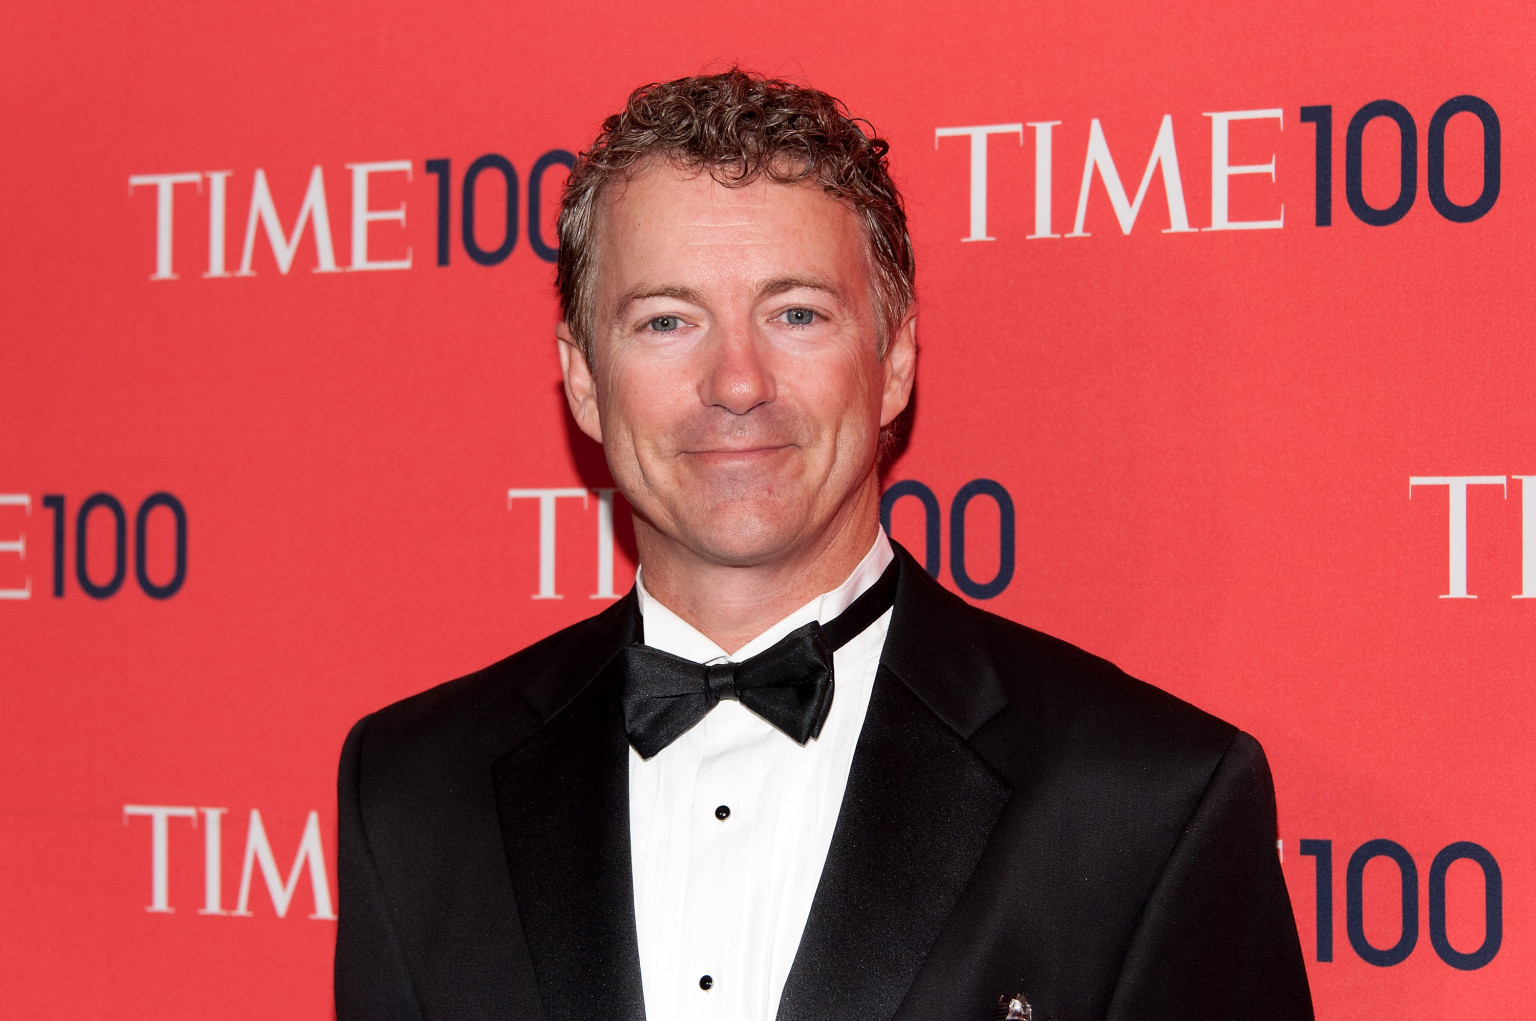 Rand Paul Torn Between Tea Party Fire, White House Dreams | HuffPost1536 x 1021